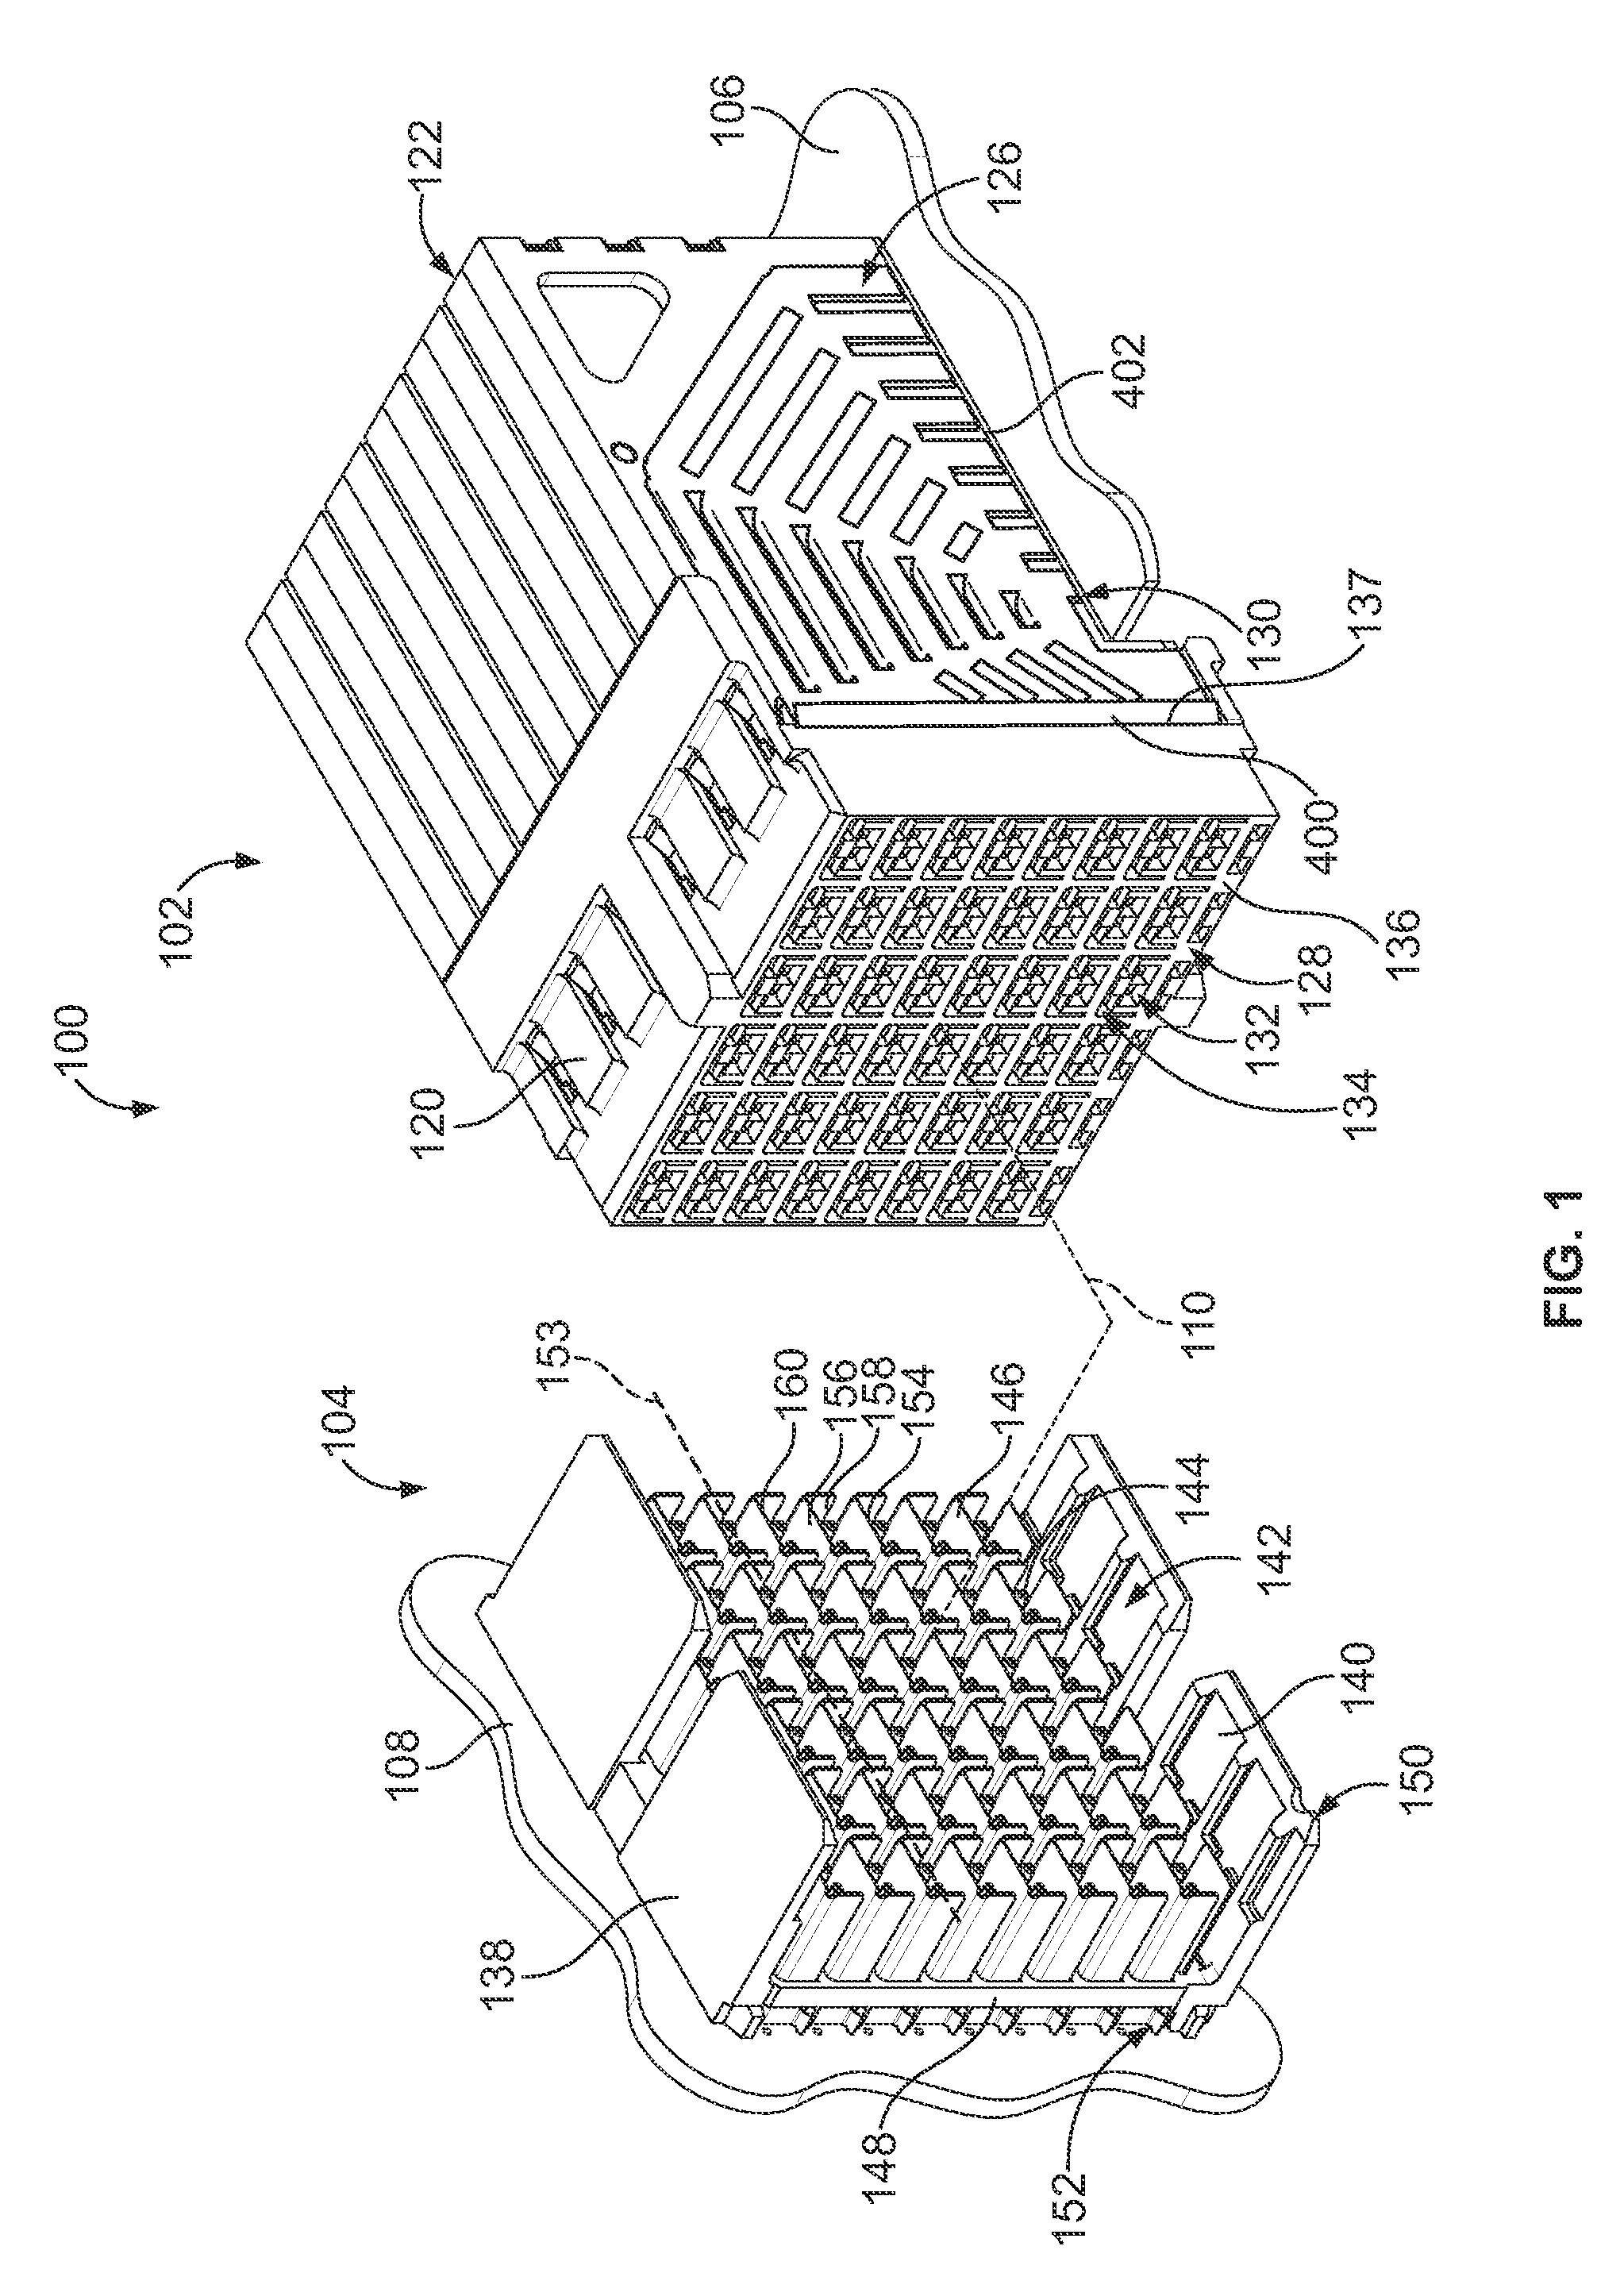 Receptacle assembly